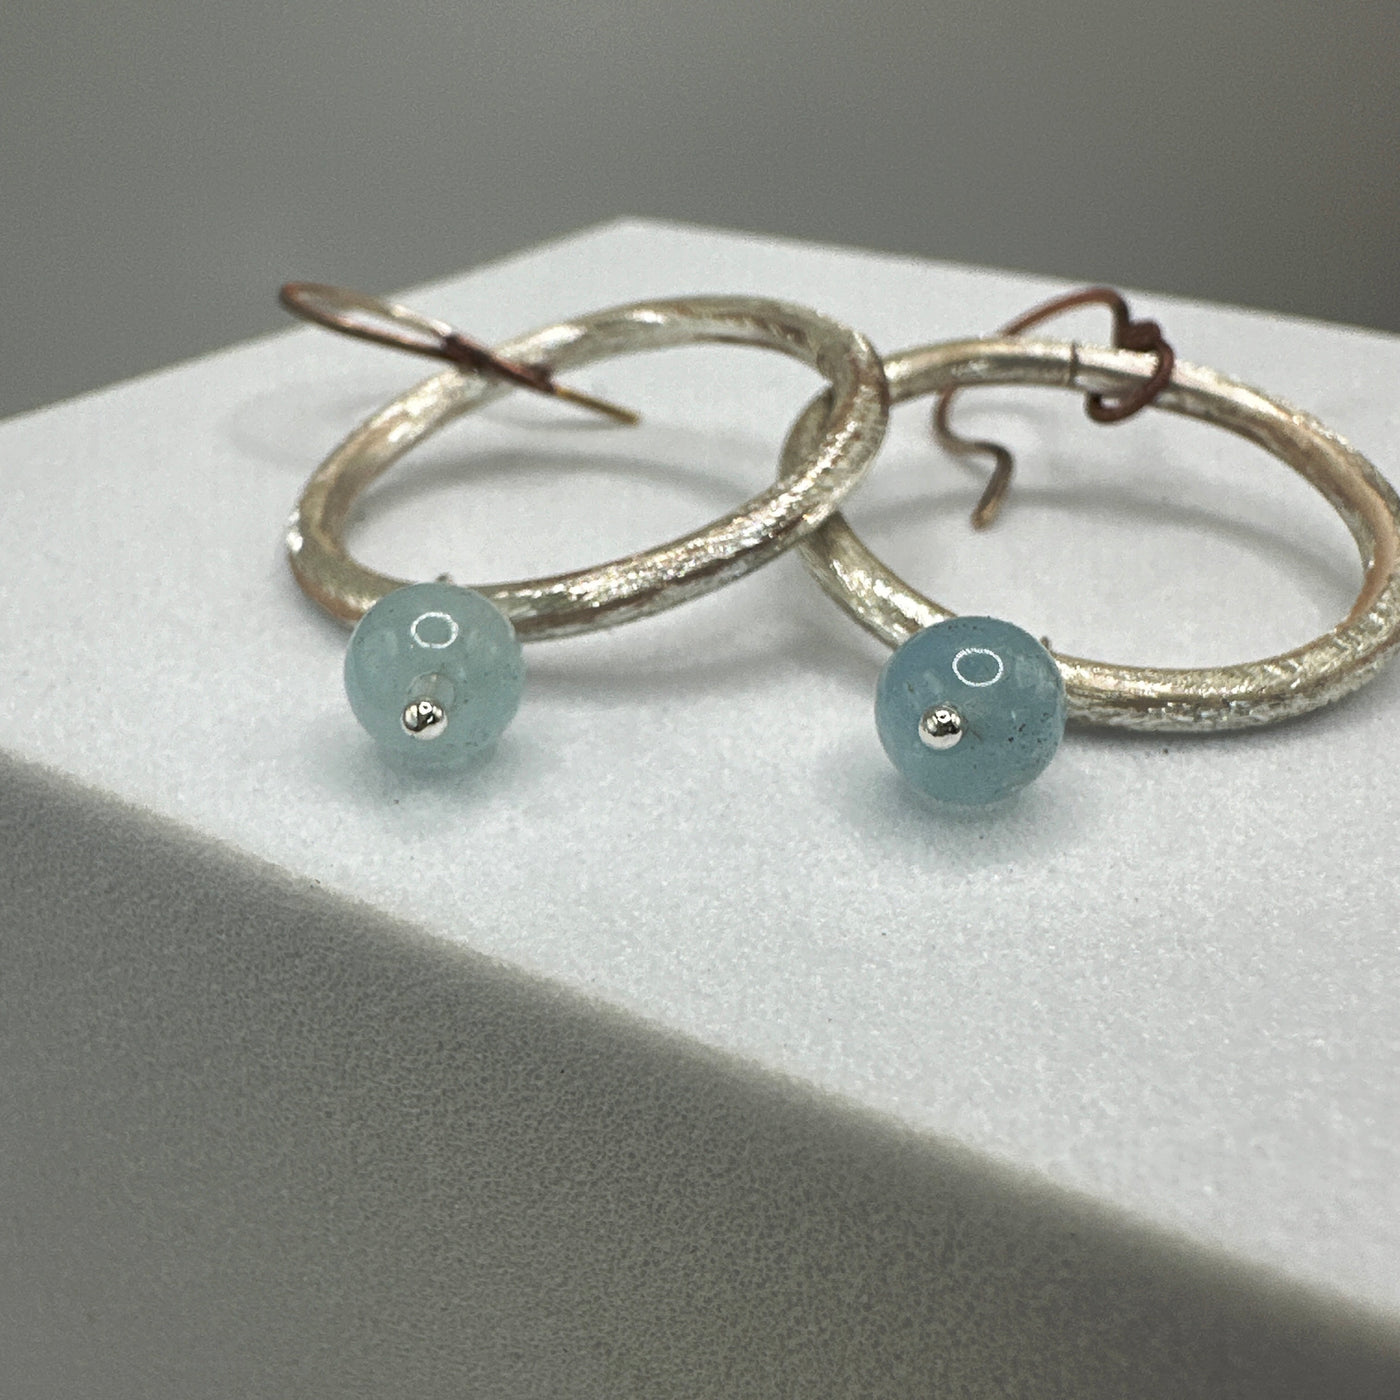 Silver round rings and aquamarine earrings